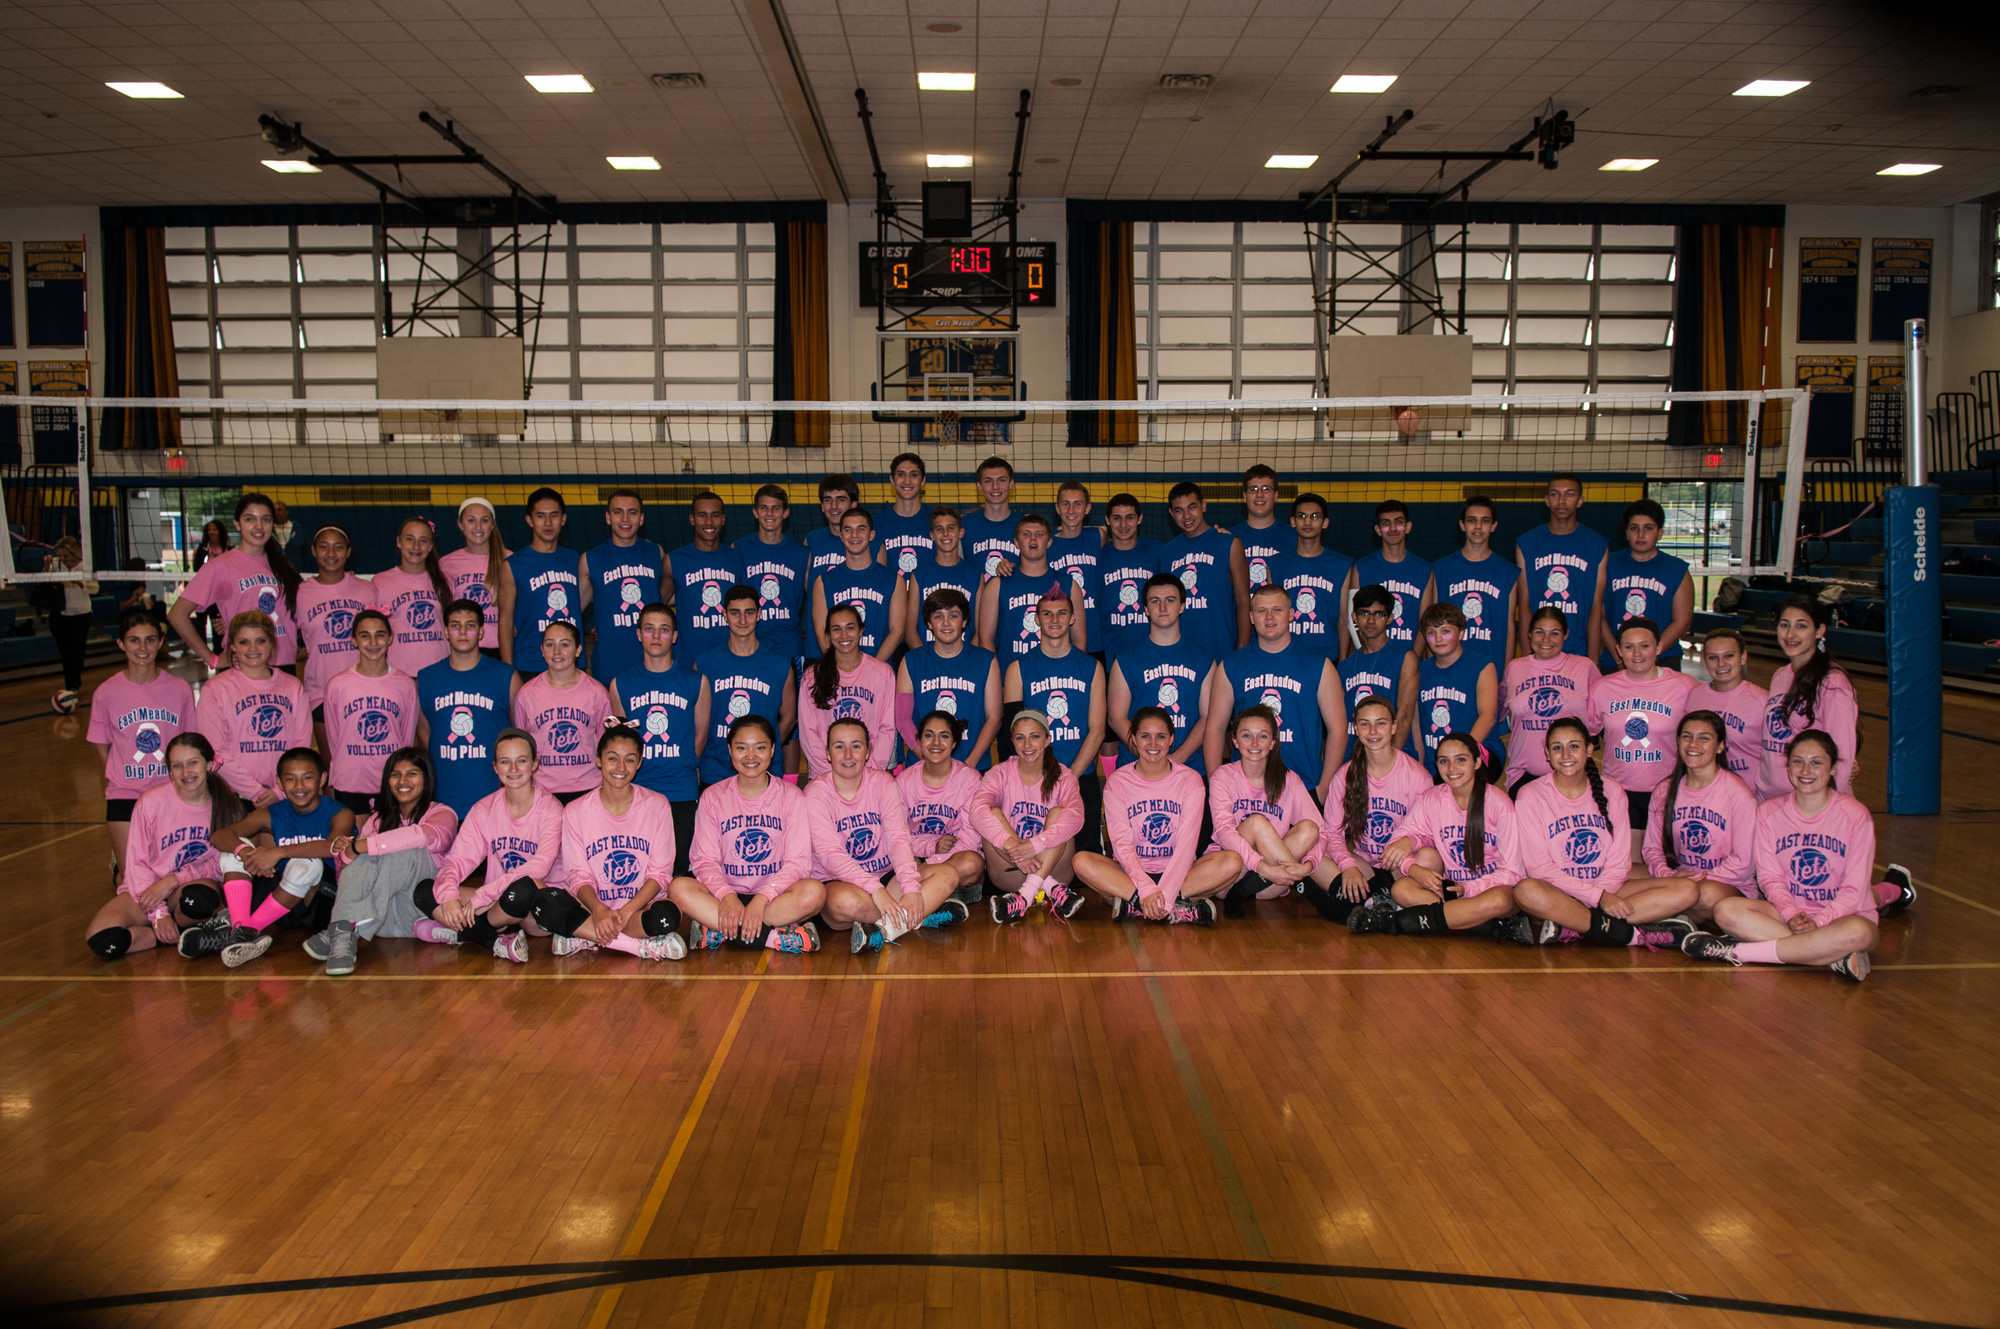 East Meadow’s volleyball program has raised money for Dig Pink for the last 10 years. Last year’s participants, shown above, raised more than $2,000.